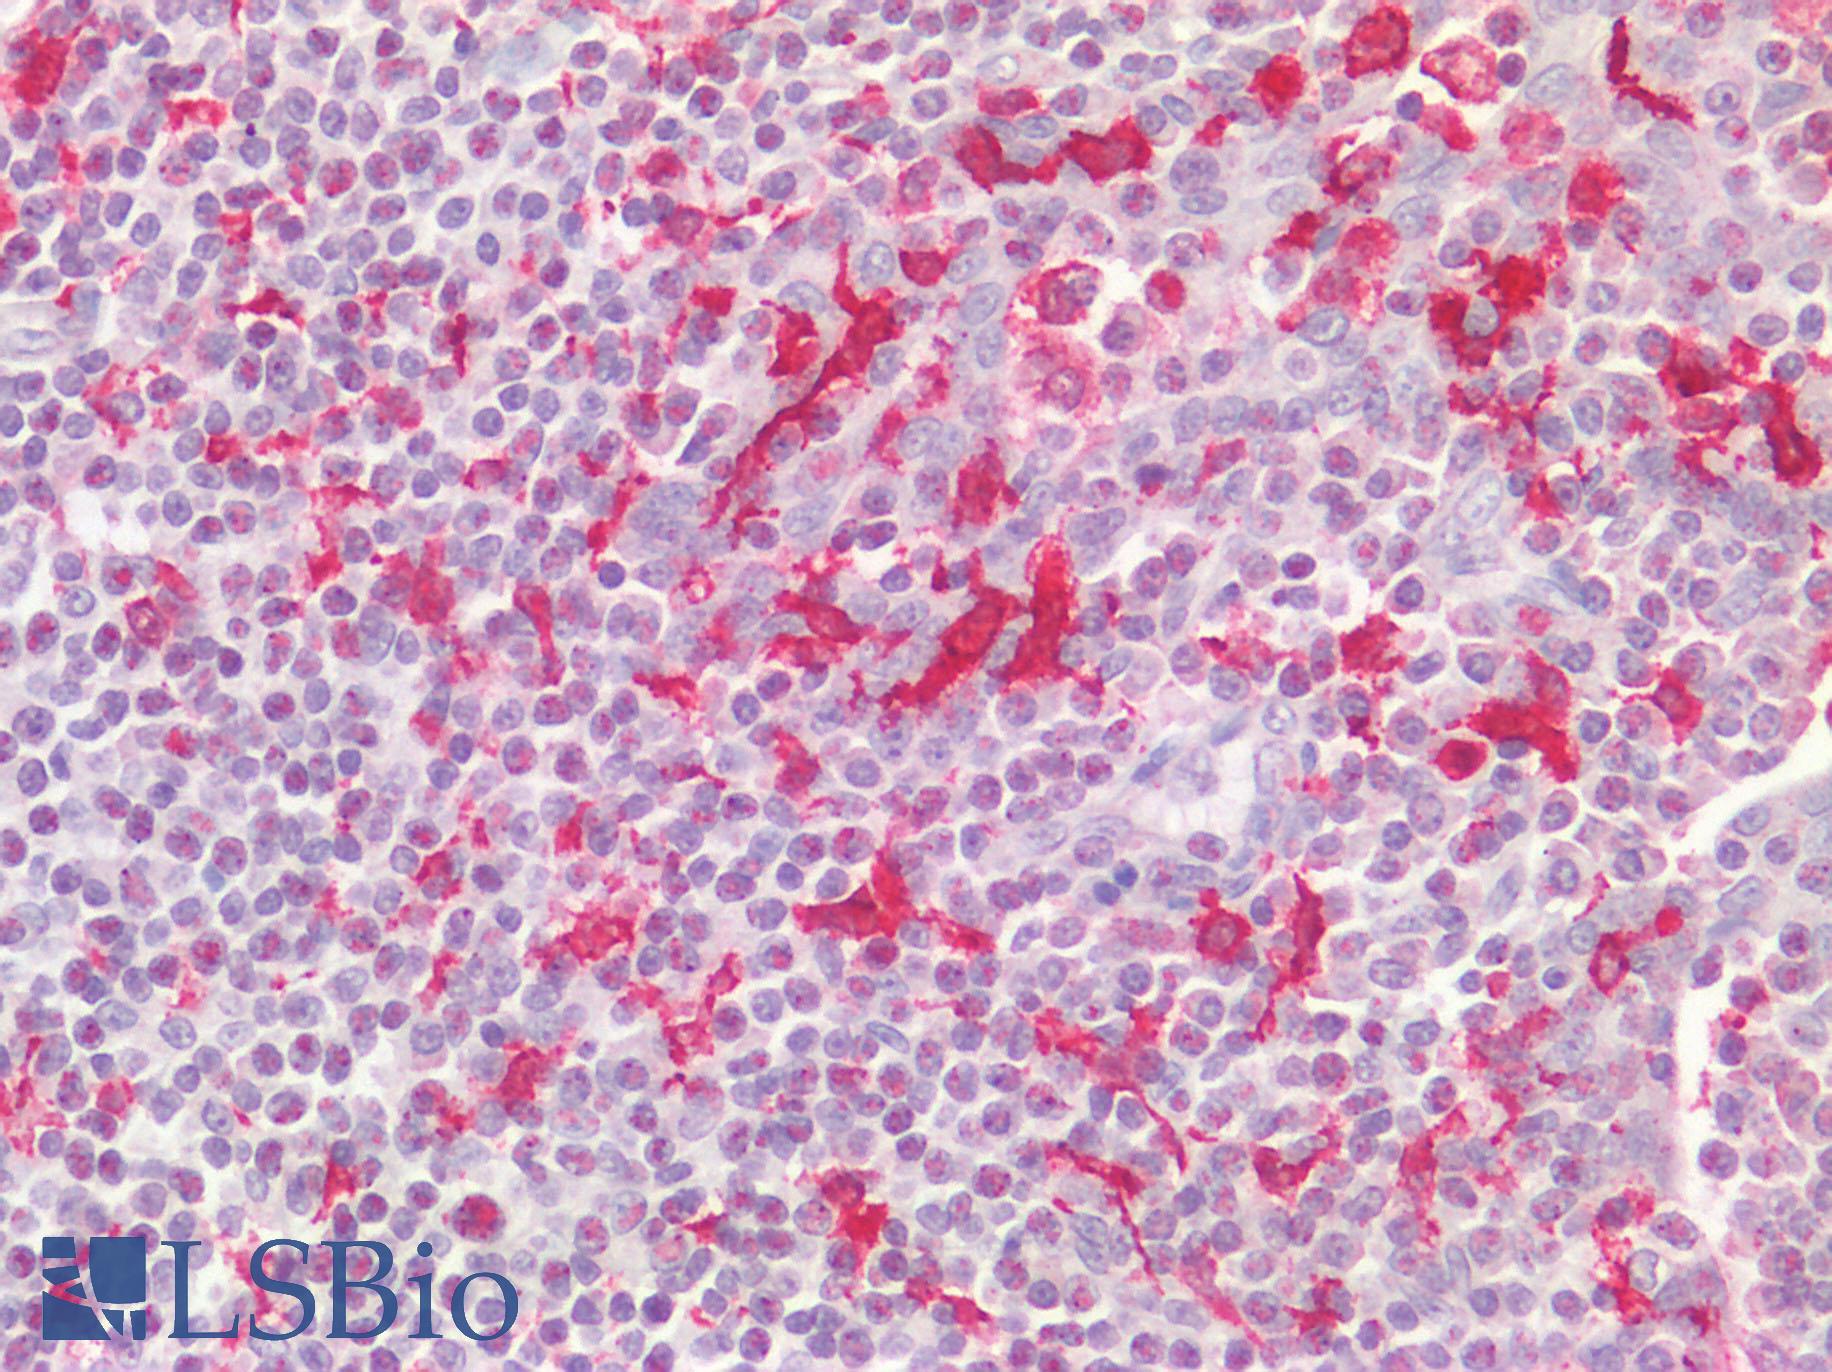 AIF1 / IBA1 Antibody - Human Tonsil: Formalin-Fixed, Paraffin-Embedded (FFPE) HIER using 10 mM sodium citrate buffer pH 6.0